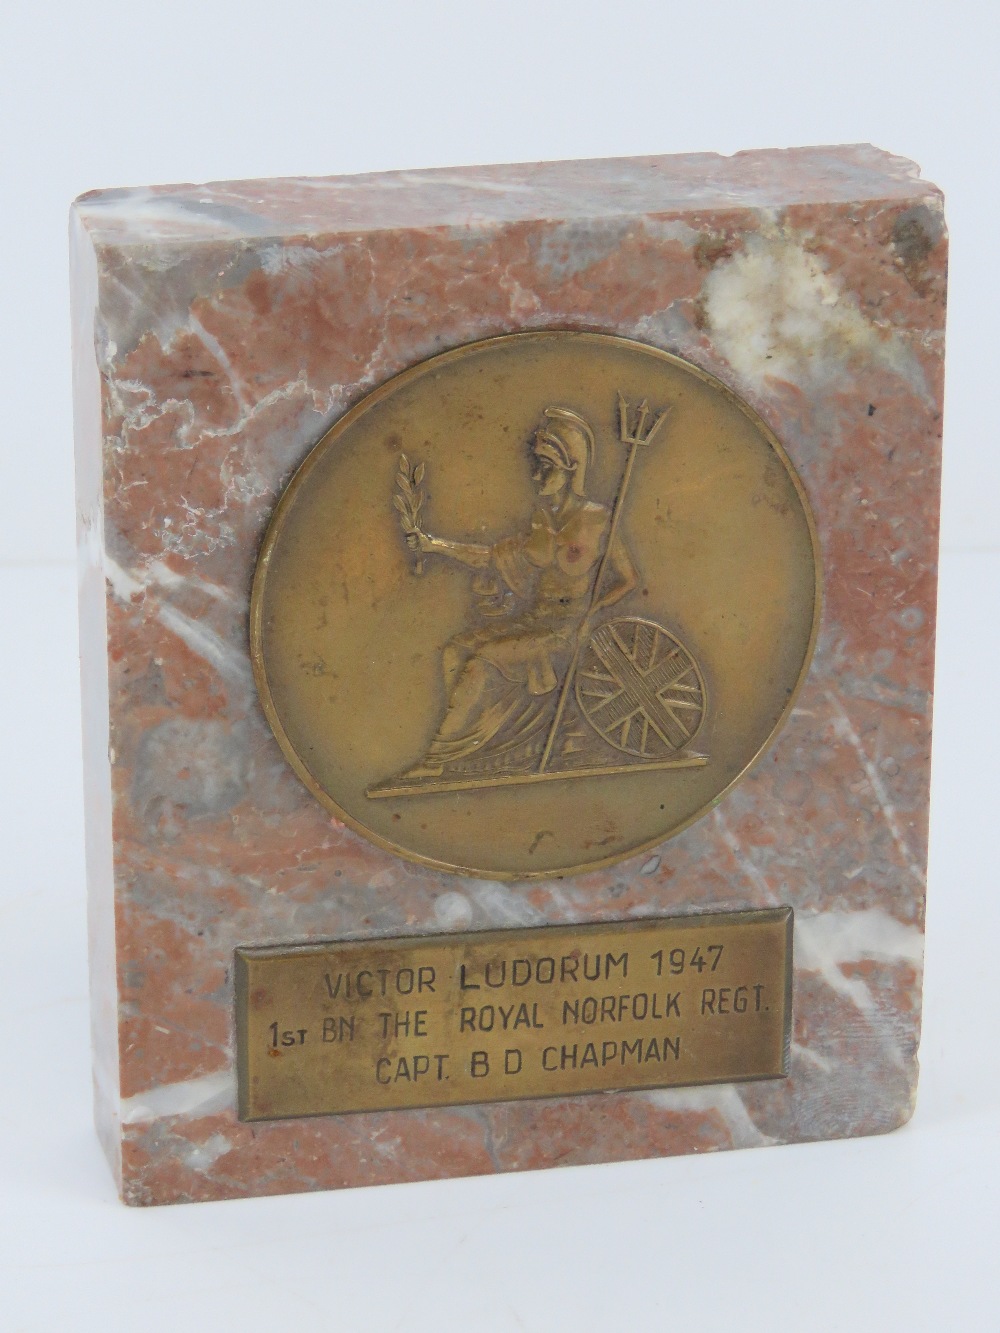 A marble base award dedicated to Capt. B D Chapman in the 1st BN The Royal Norfolk Regt in 1947.